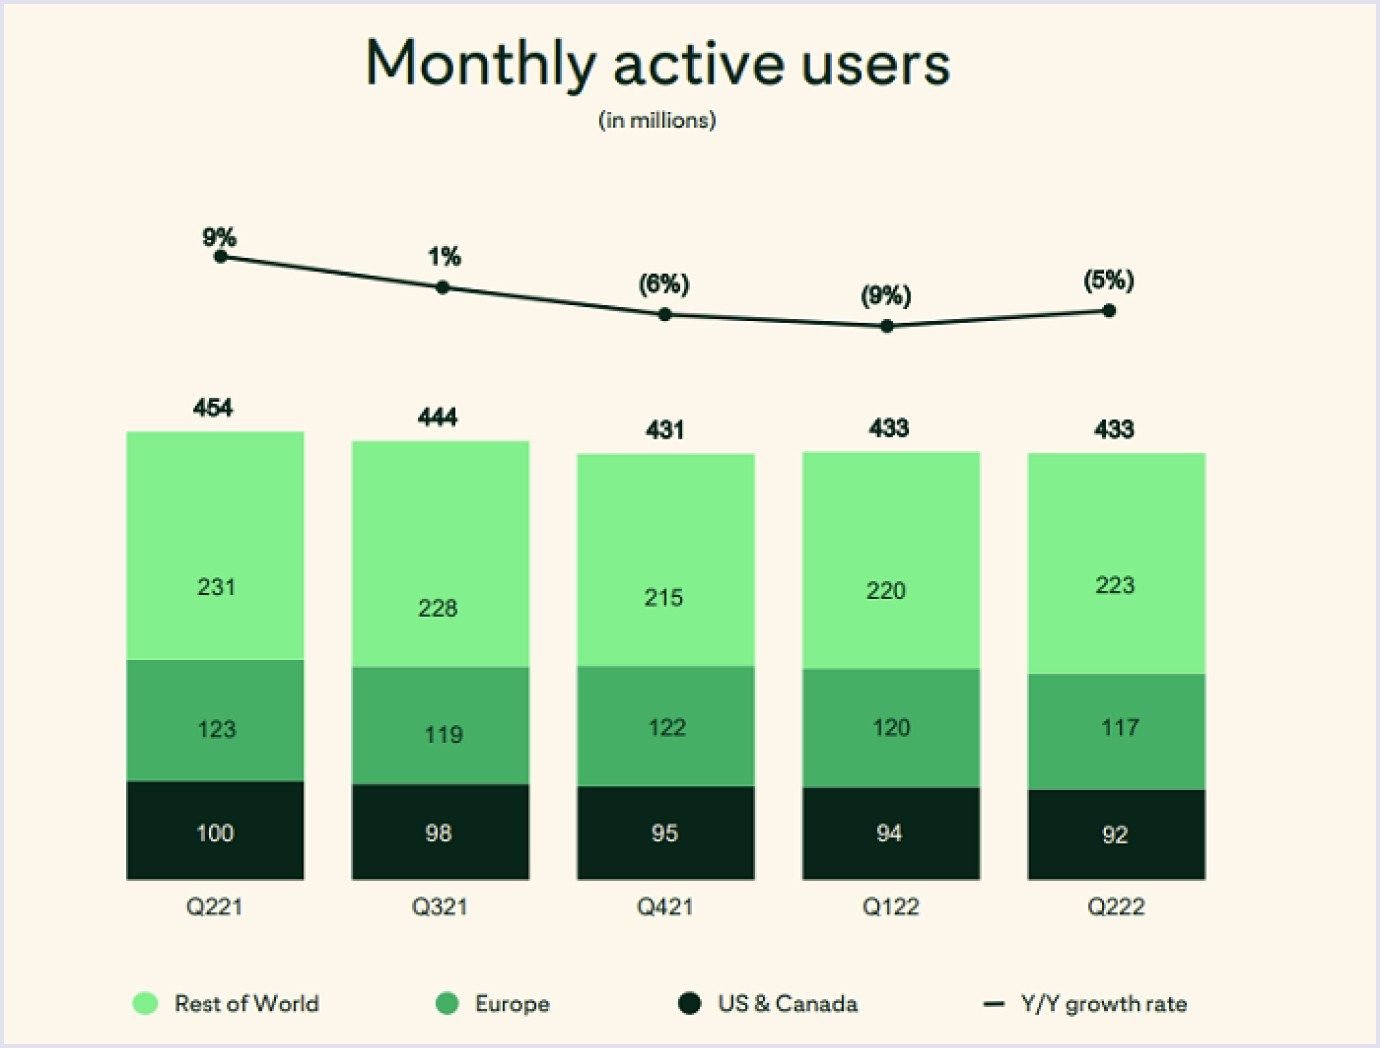 Pinterest holds at 433 million monthly users